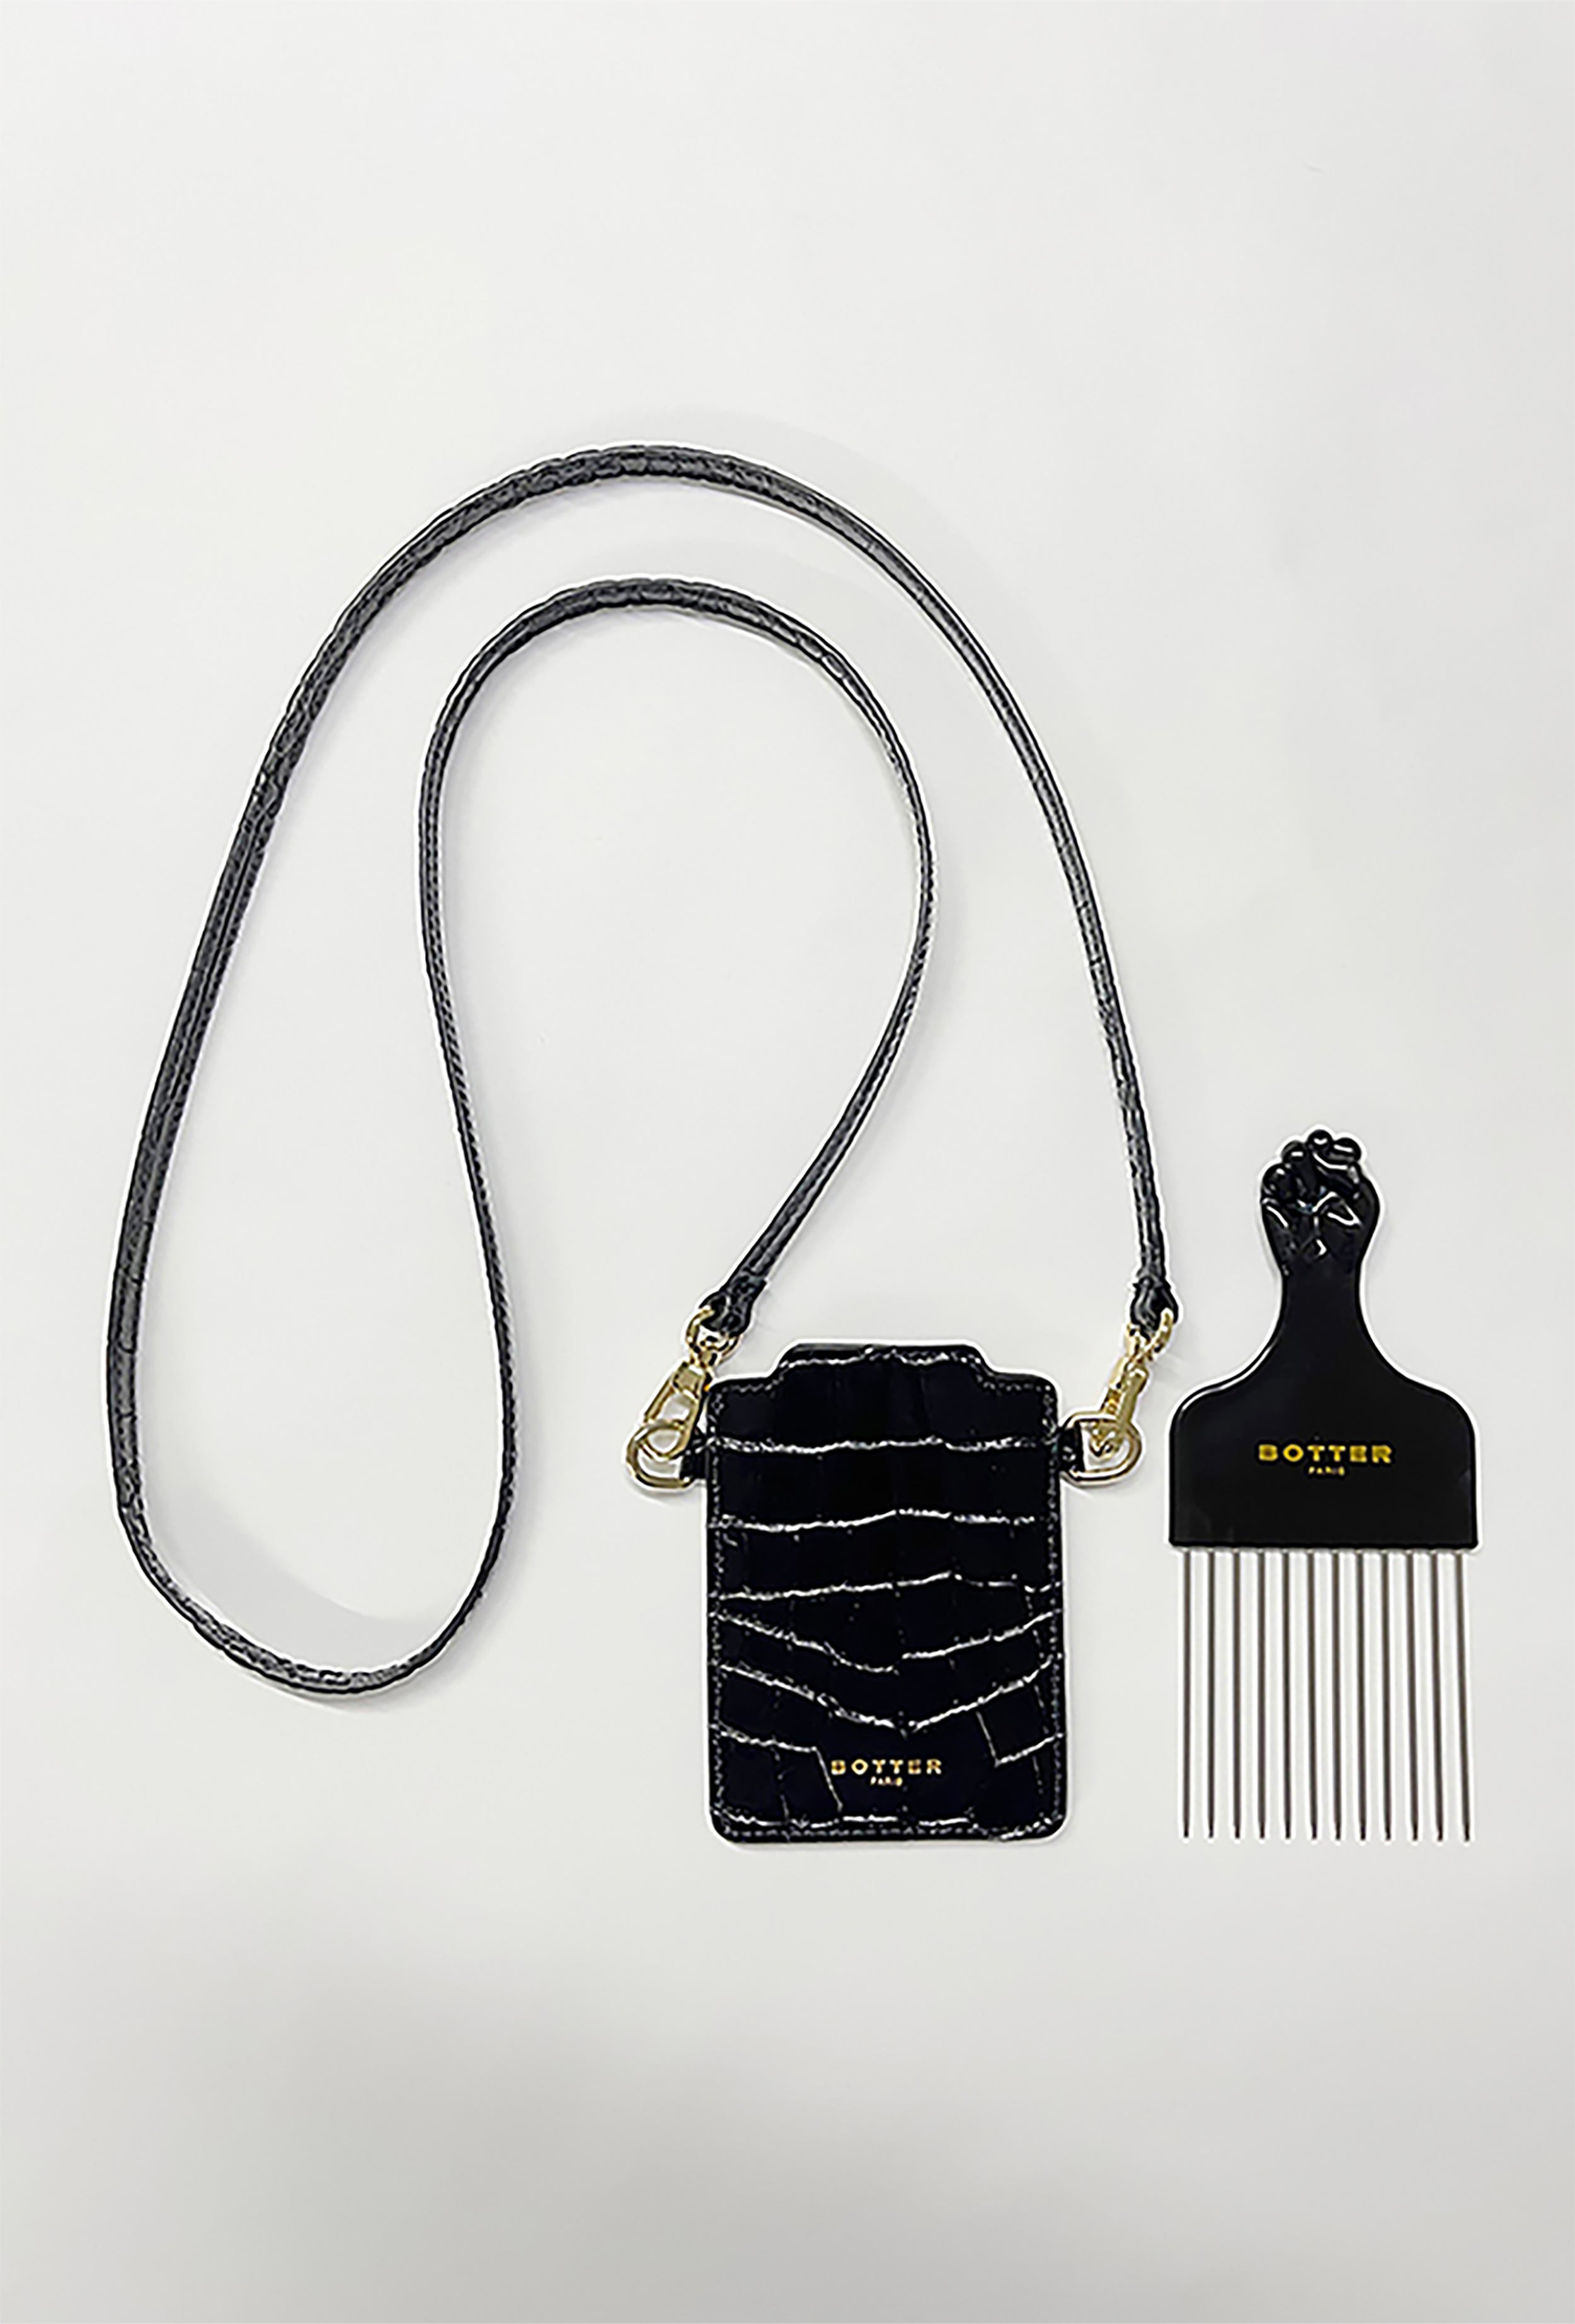 Afro Comb With Croc Print Leather Bag